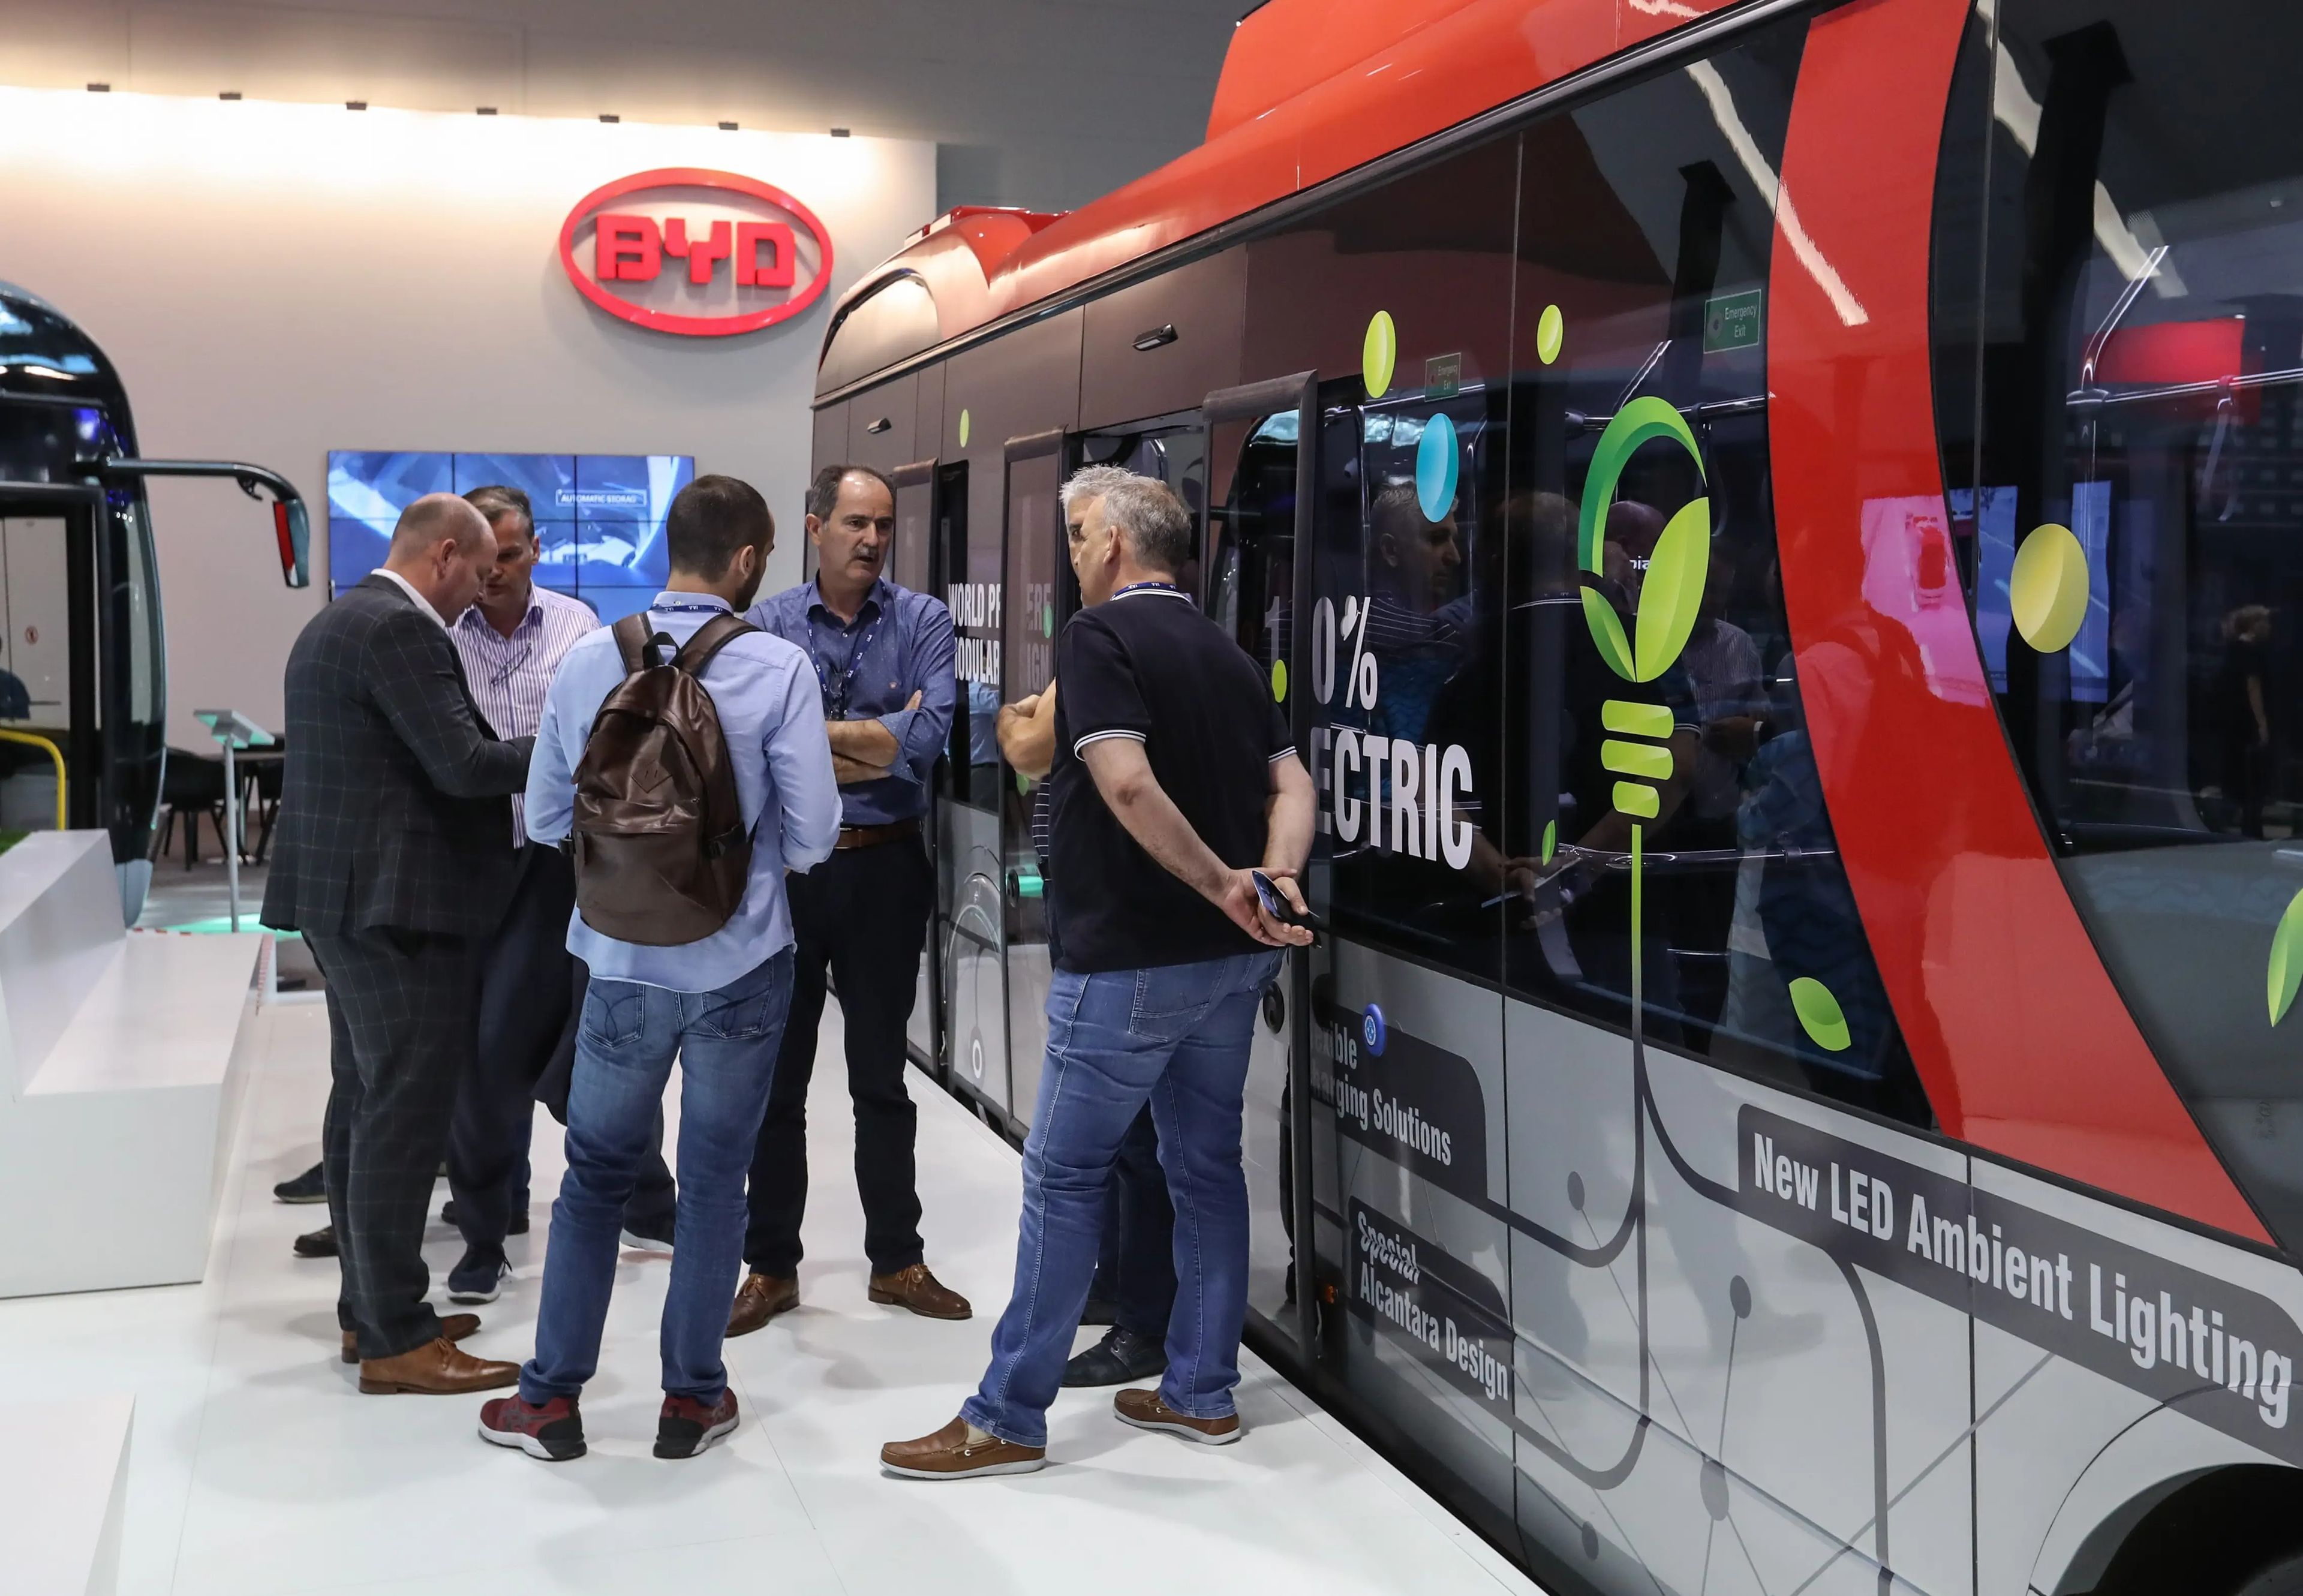 Visitors are seen at the booth of BYD during the 67th IAA Commercial Vehicles in Hanover, Germany, on Sept. 20, 2018. TO GO WITH XINHUA HEADLINES OF APRIL 30, 2021